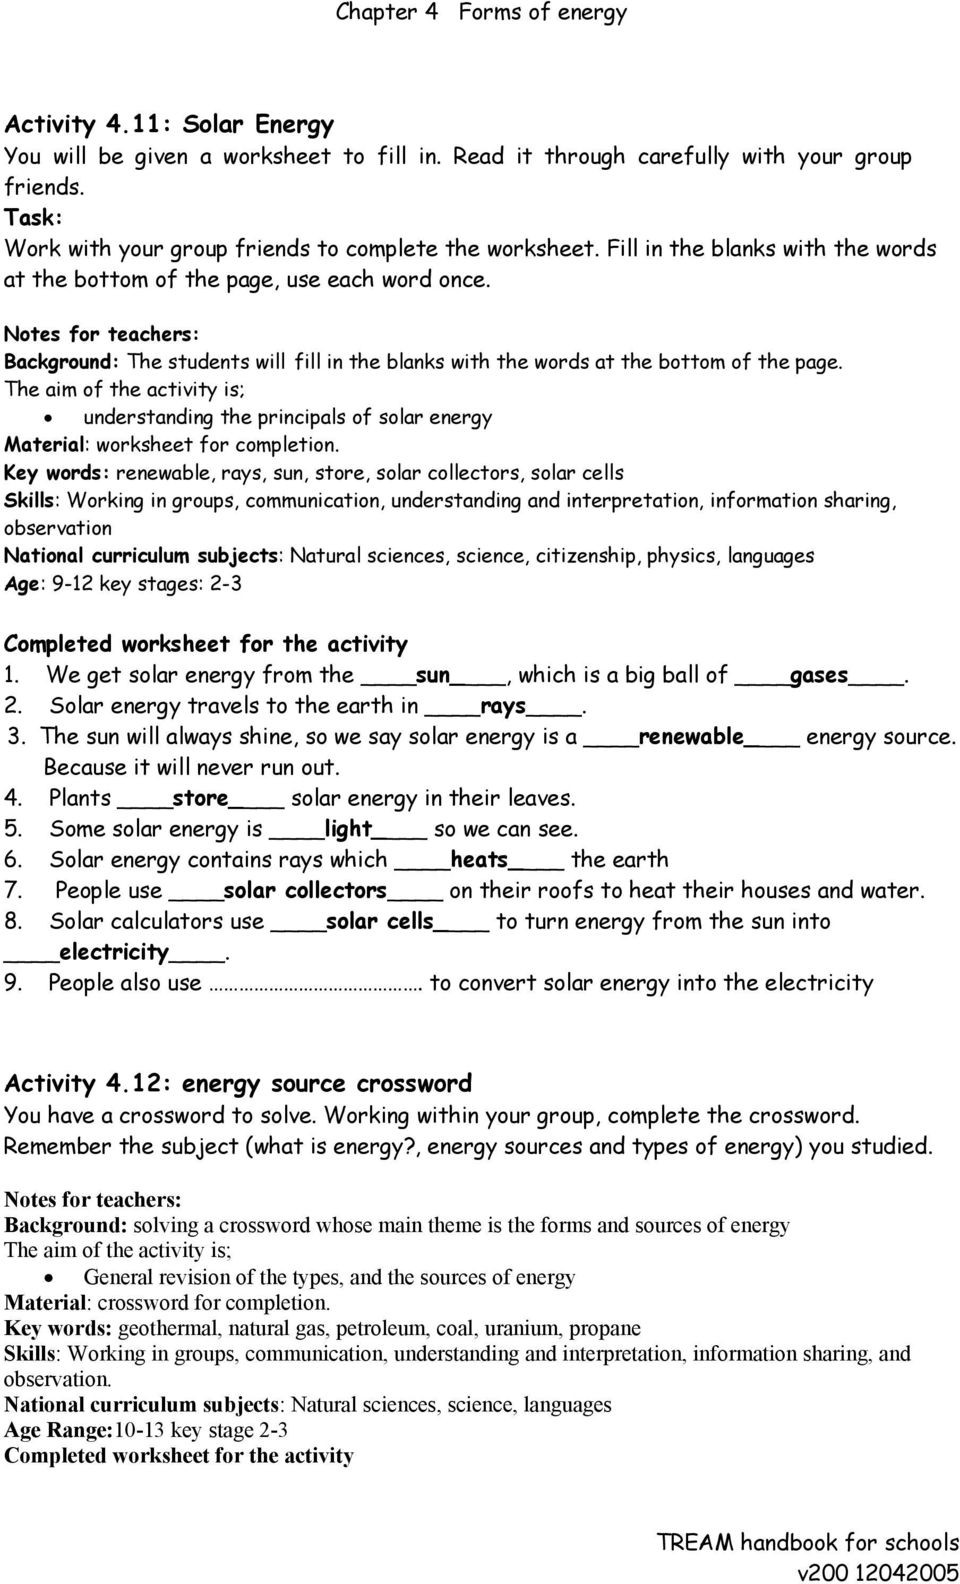 Energy Transformation Worksheet Answer Key Chapter 4 forms Of Energy Pdf Free Download